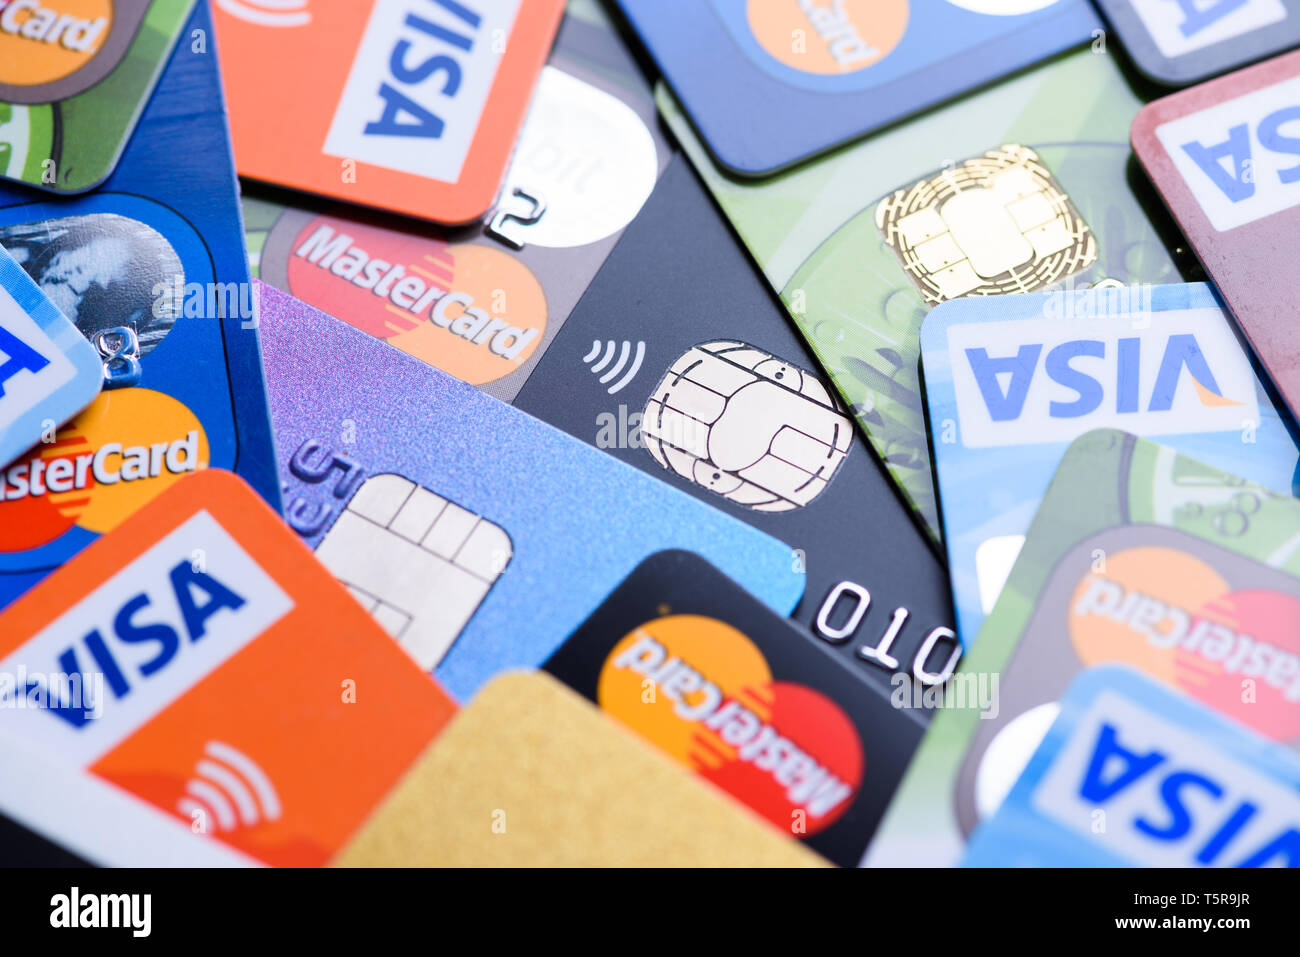 Krakow, Poland - June 16, 2017: Plastic bank payment cards close-up, Visa and Mastercard, credit and debit with different chips and wireless payment t Stock Photo